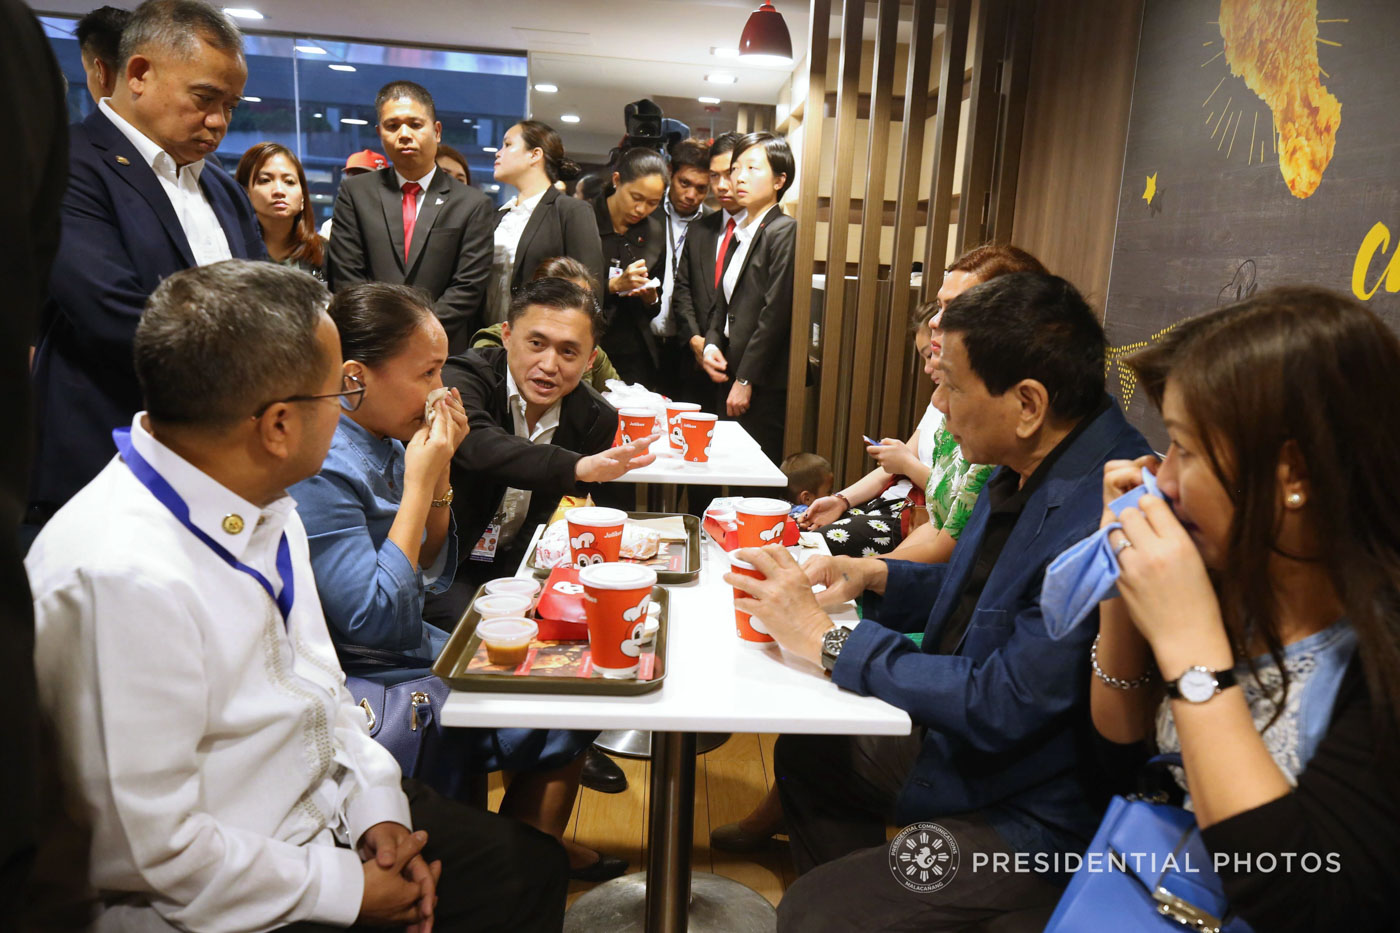 OFW CONCERNS. Sara Duterte and Honeylet Avanceña join President Duterte in Jollibee in Hong Kong where he speaks with an OFW. Malacañang photo 